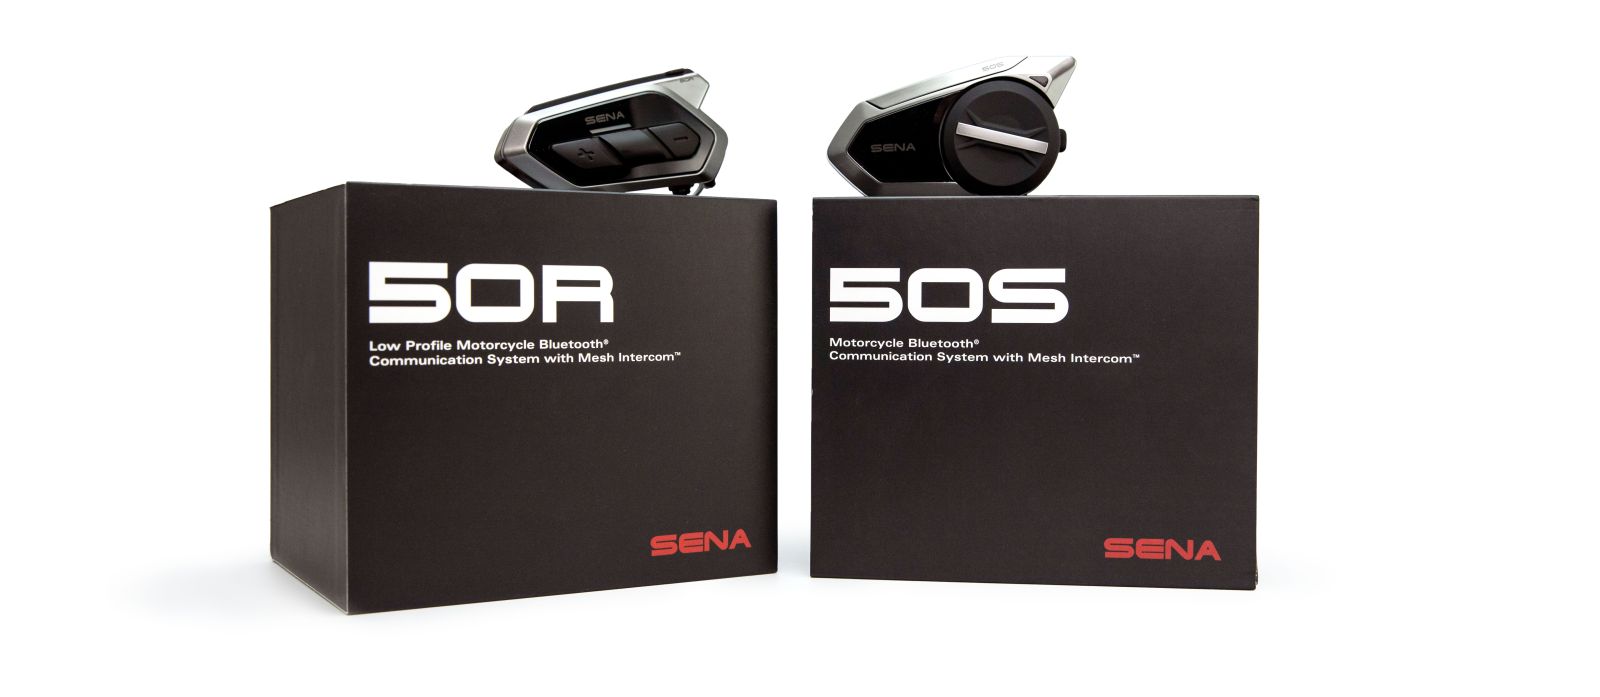 Our Blog Sena What's the difference between the SENA 50R and the 50S?